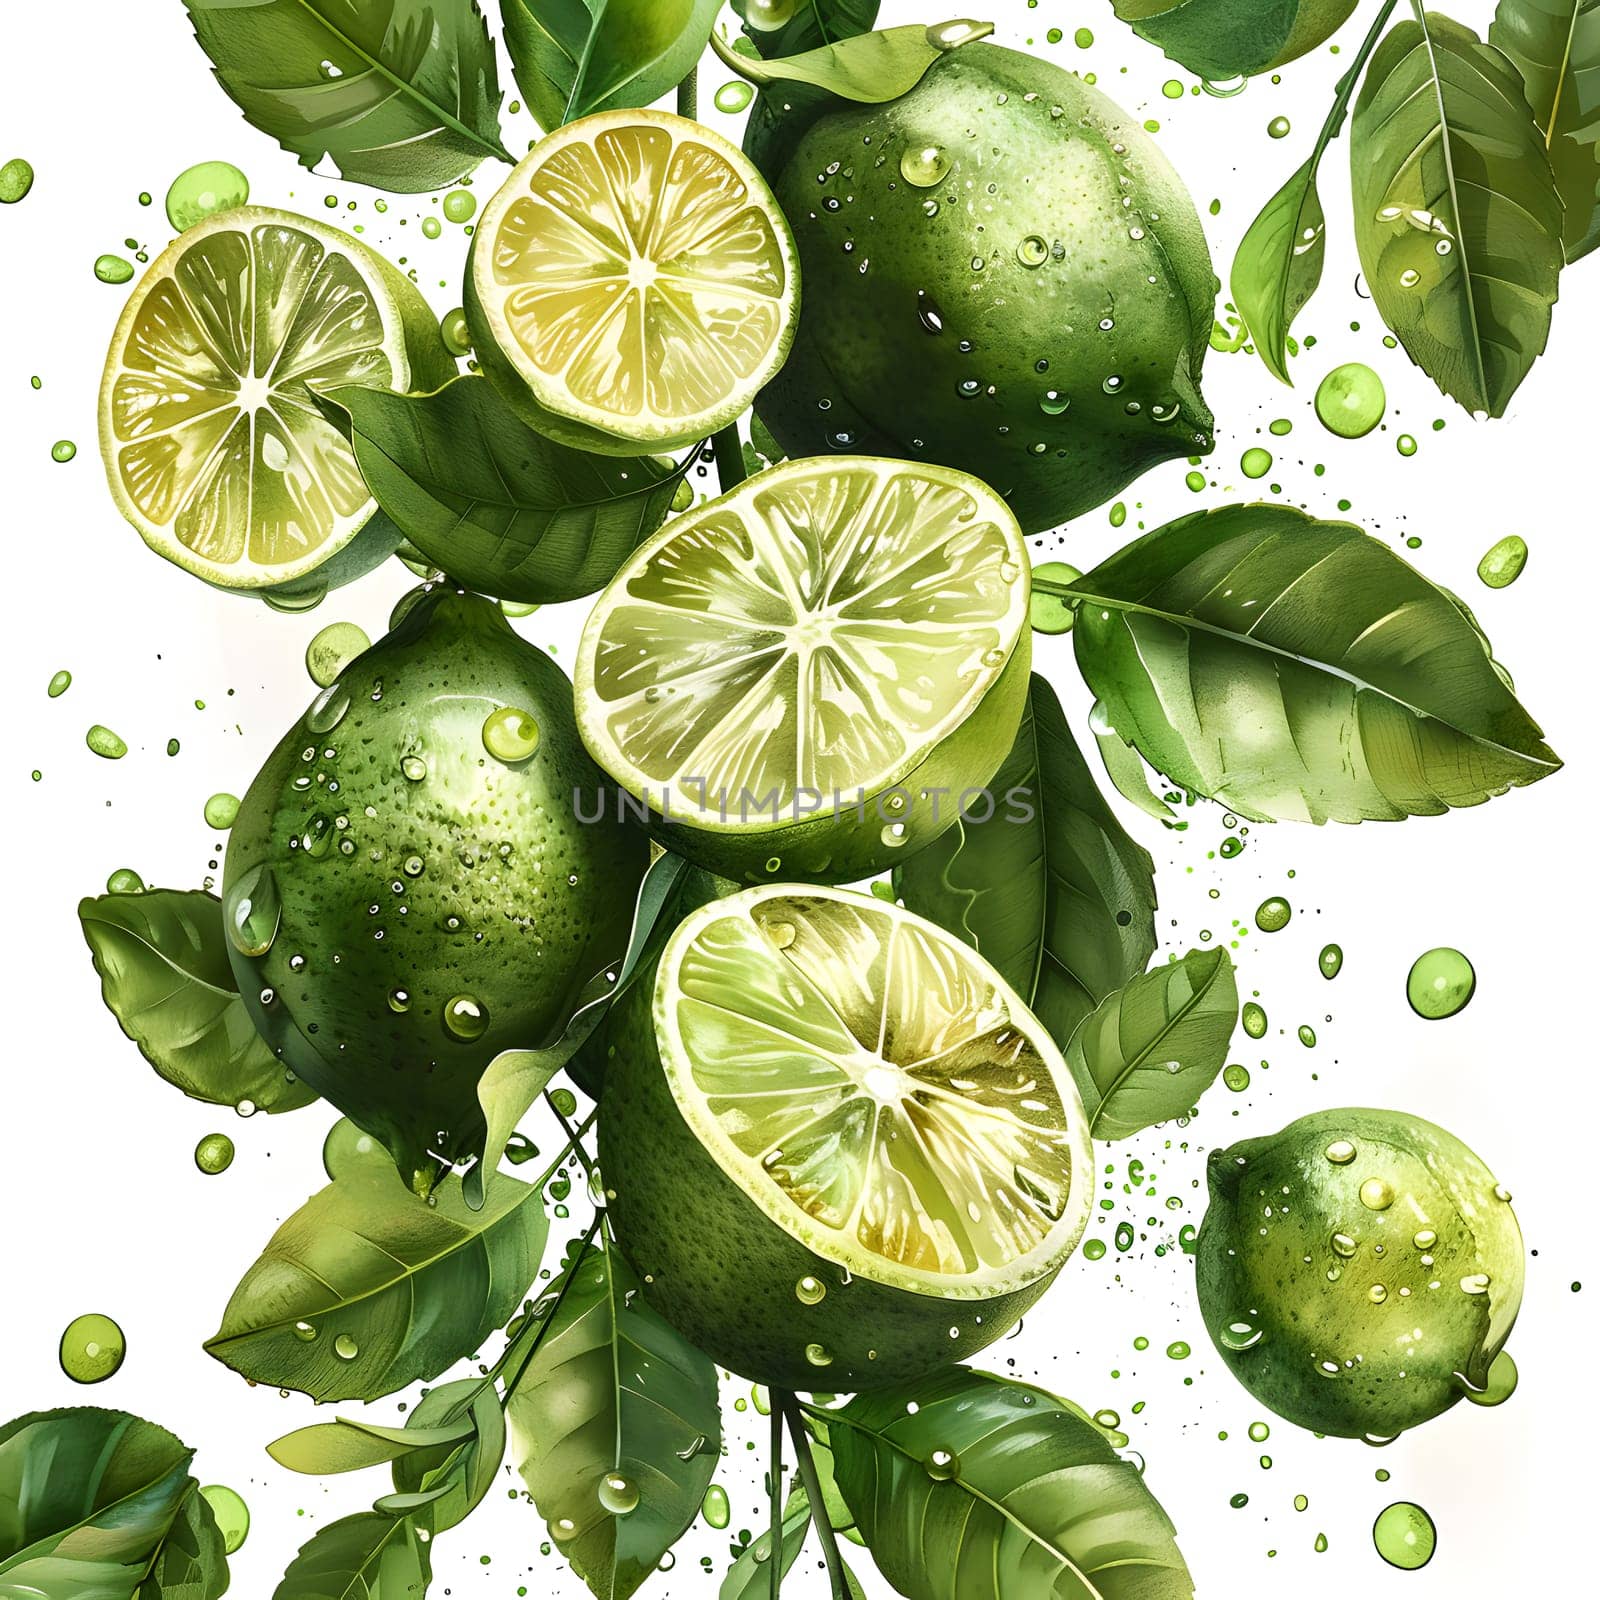 a bunch of green lemons with leaves on a white background by Nadtochiy